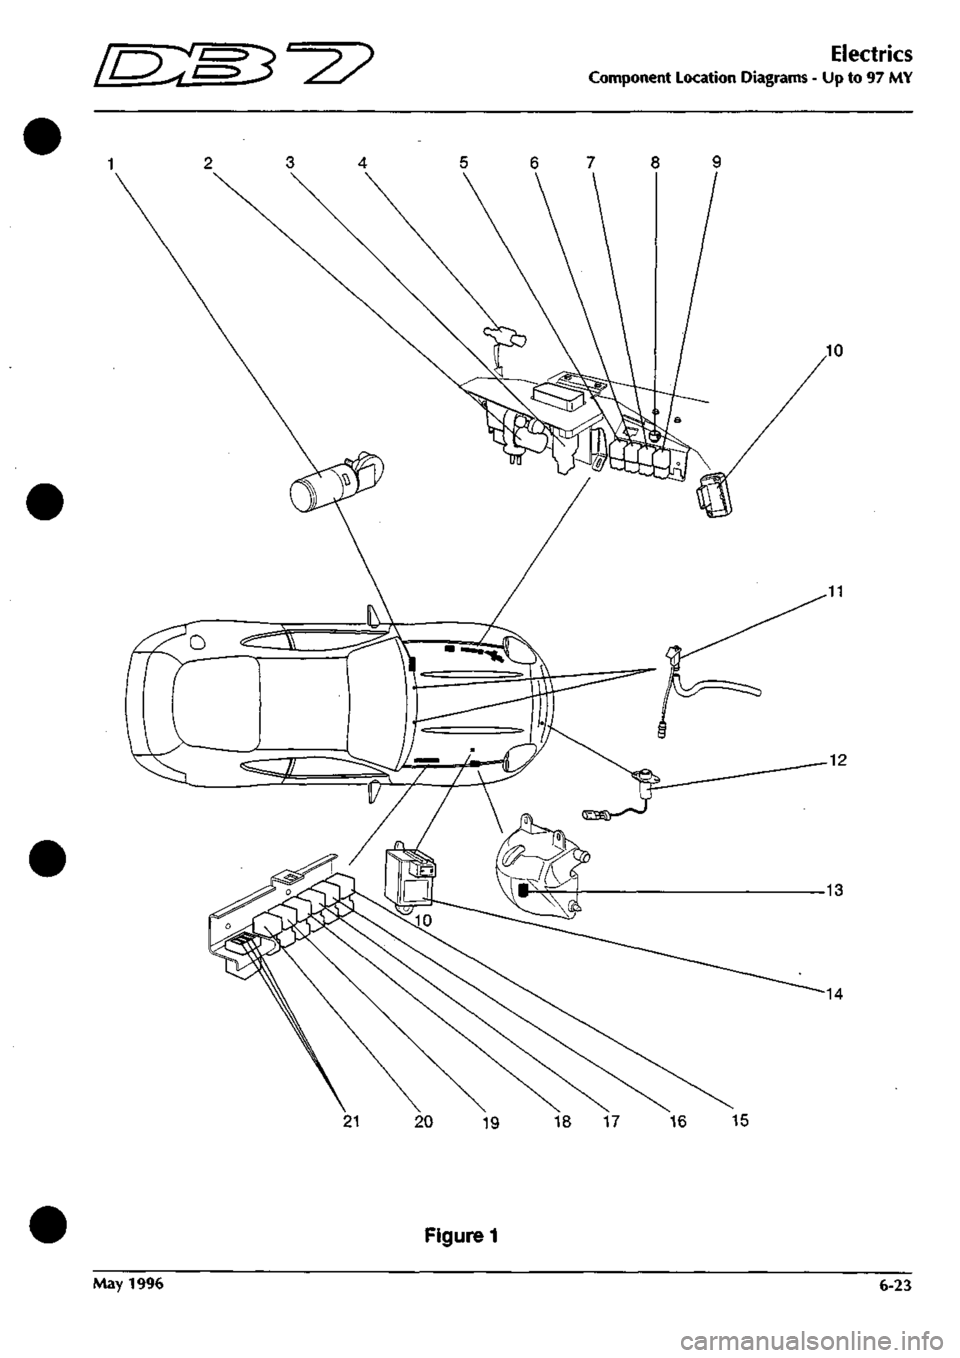 ASTON MARTIN DB7 1997 Owners Guide 
/E^S^-^T? 
Electrics 
Component Location Diagrams - Up to 97 MY 
21 20 19 18 17 16 15 
Figure 1 
May 1996 6-23  